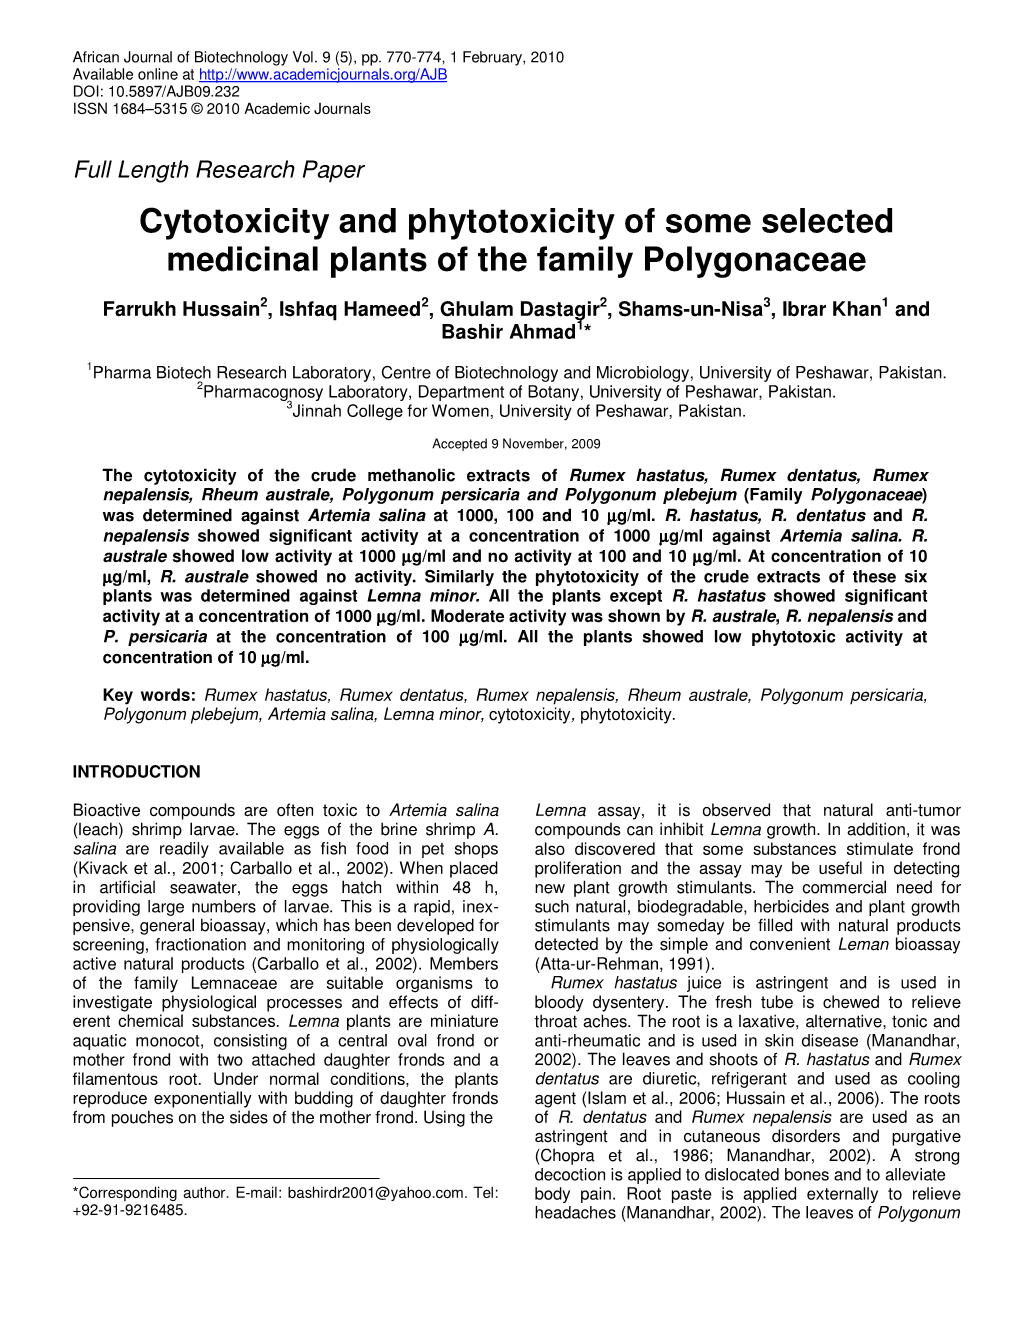 Cytotoxicity and Phytotoxicity of Some Selected Medicinal Plants of the Family Polygonaceae